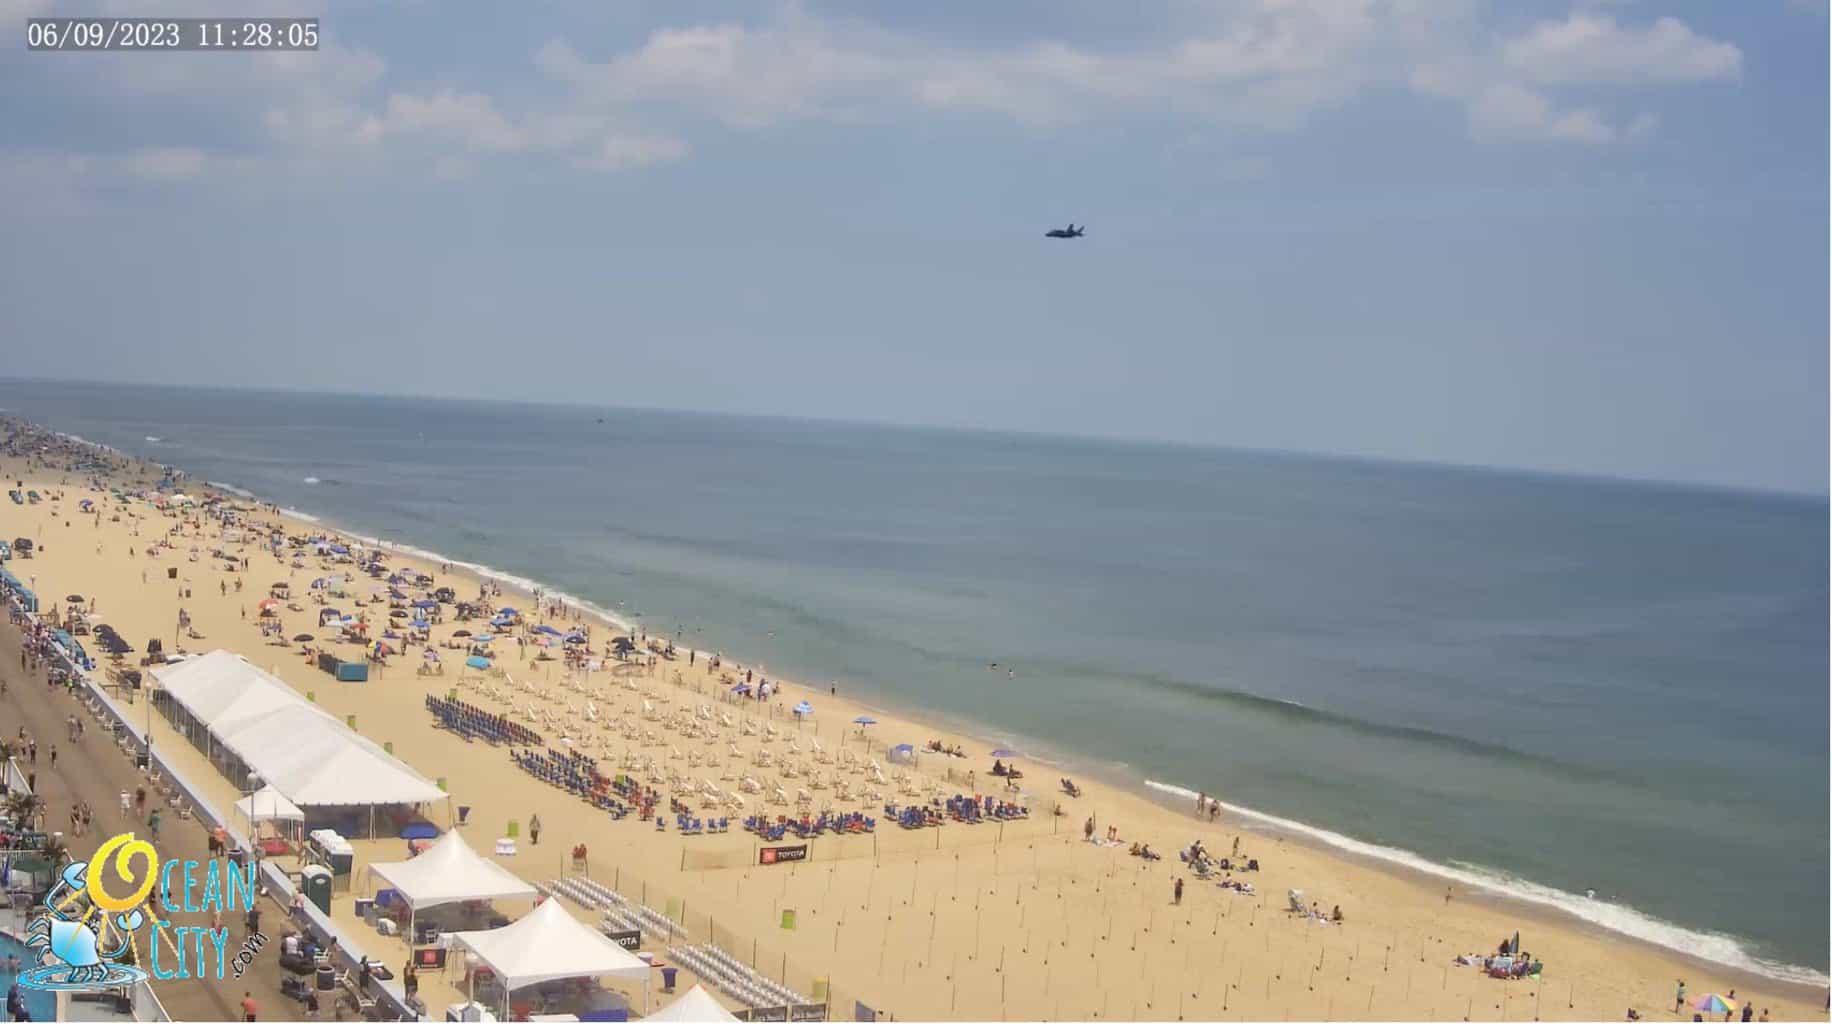 Image 6 9 23 At 1.28 PM JETS Practicing For Tomorrows Ocean City Air Show 